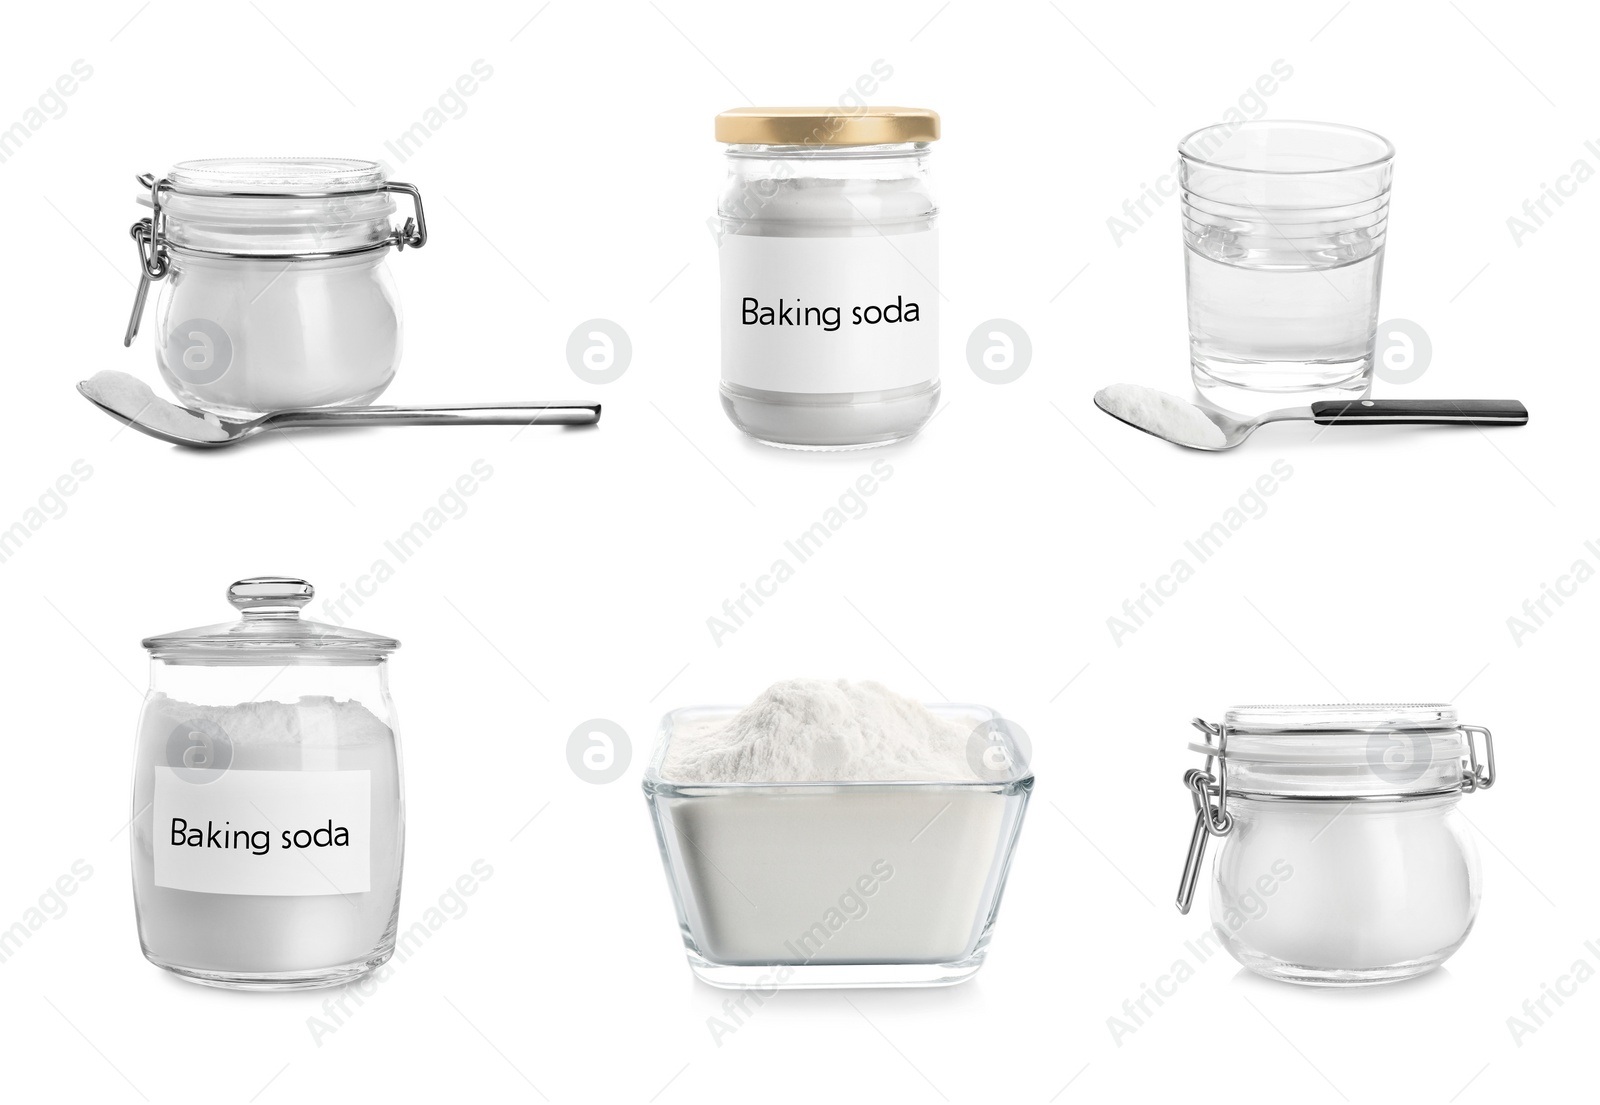 Image of Set with different kitchenware and baking soda on white background